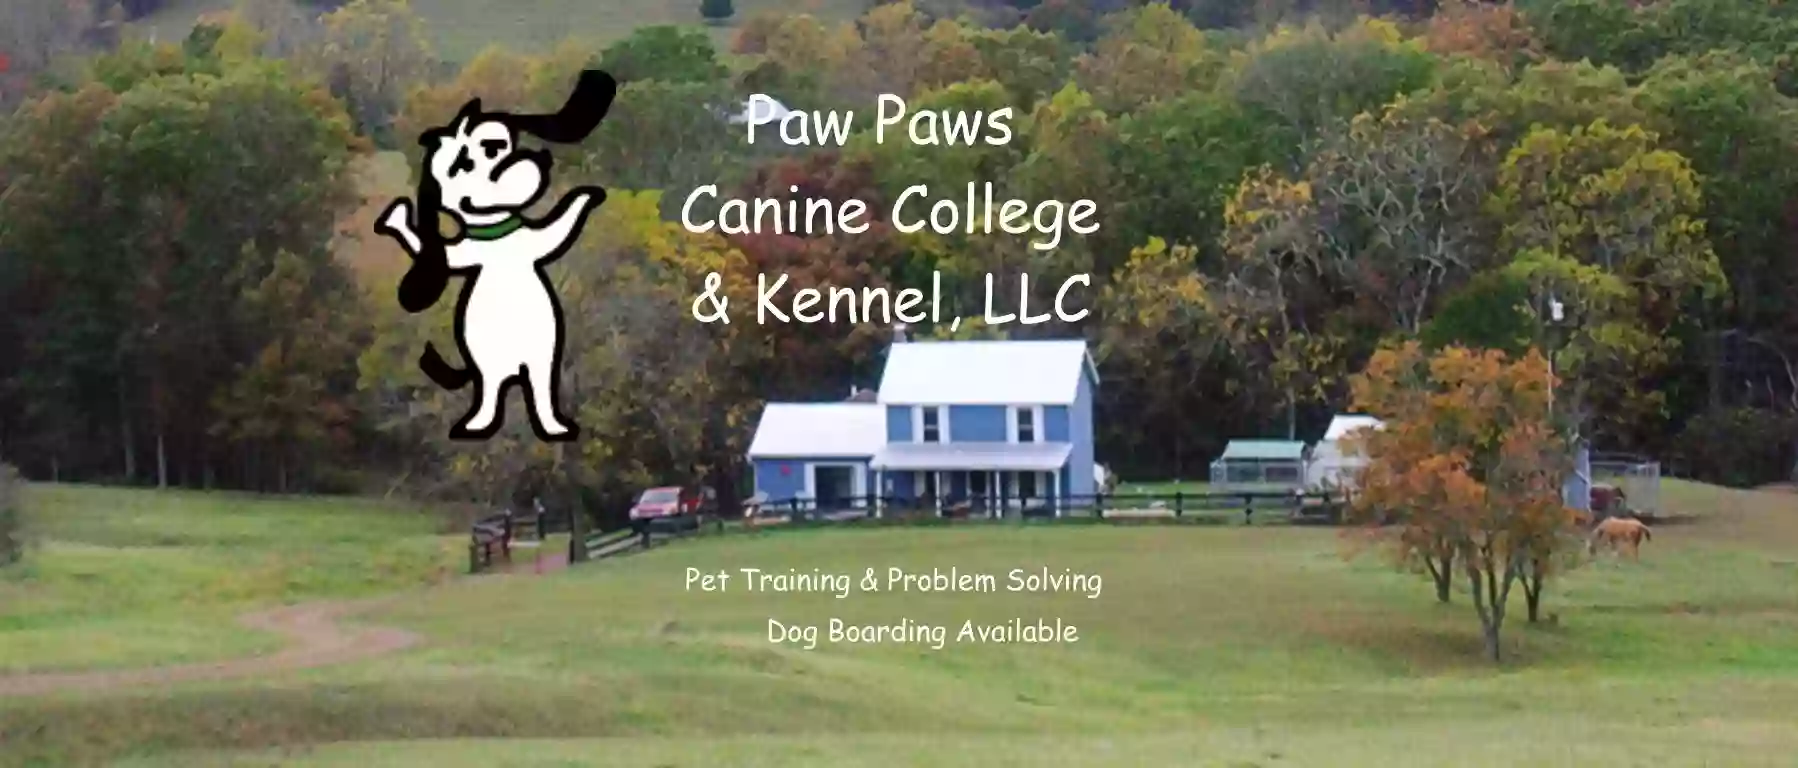 Paw Paws Canine College